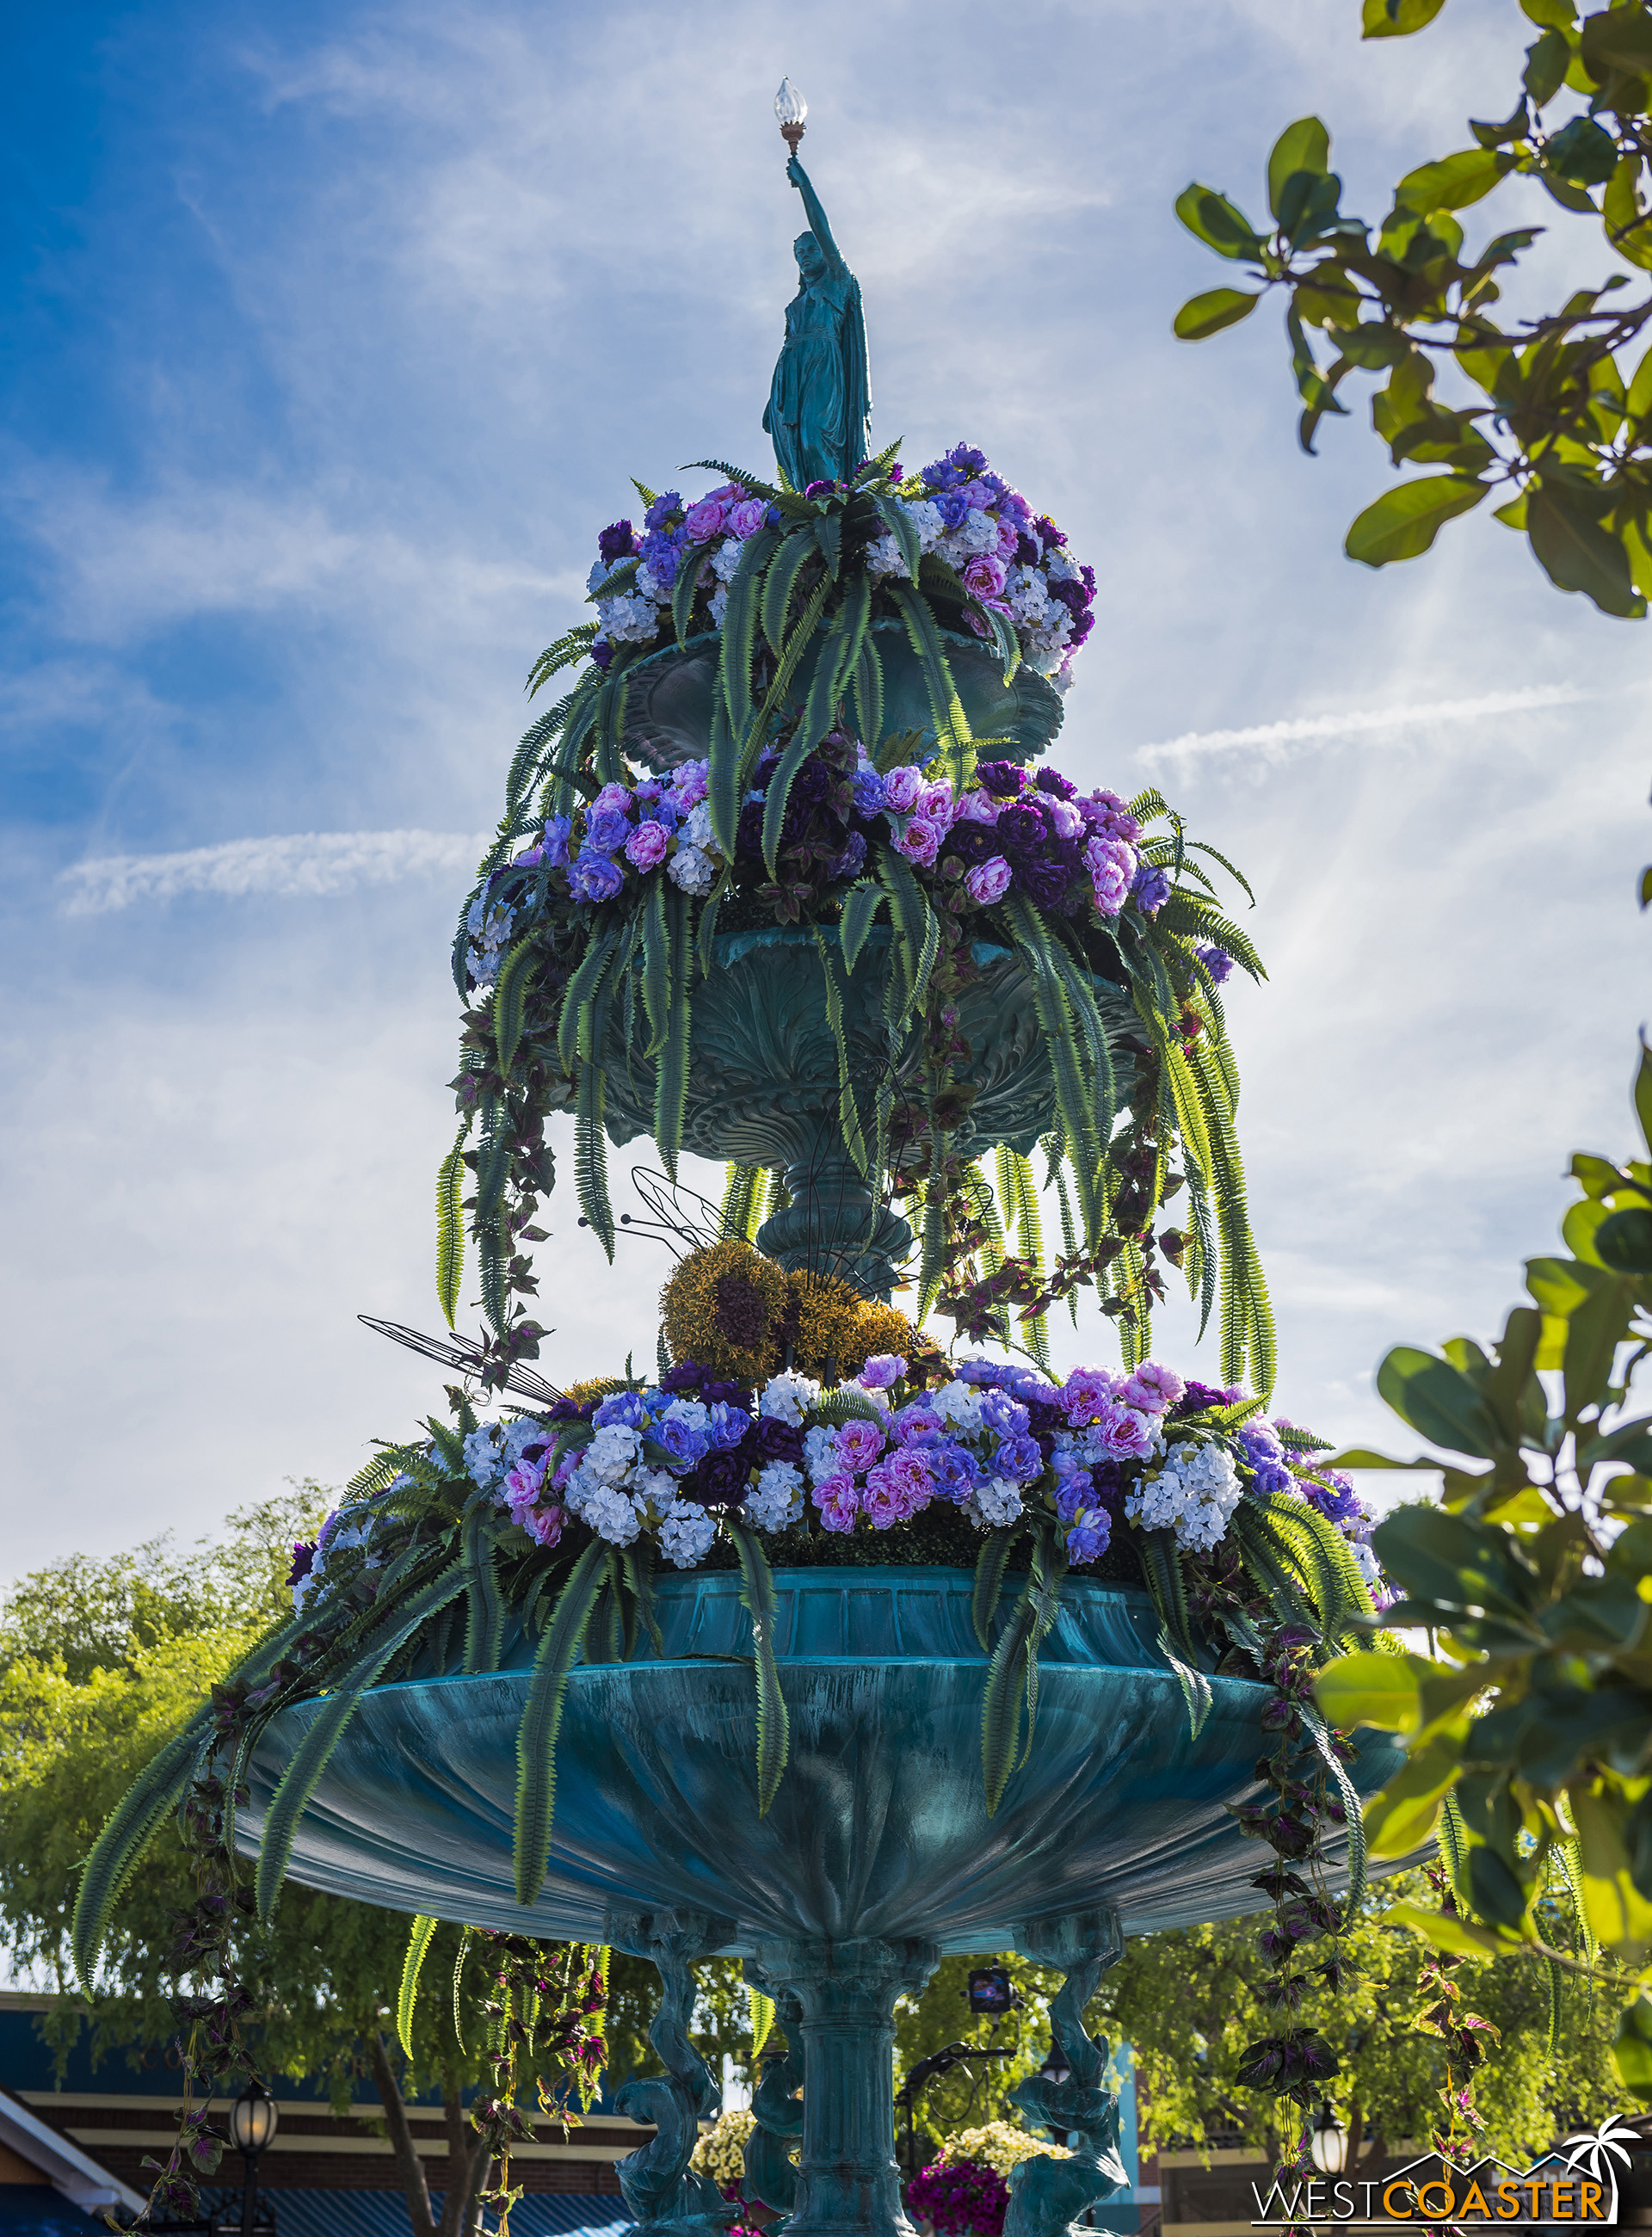  The fountain is bursting with blooms! 